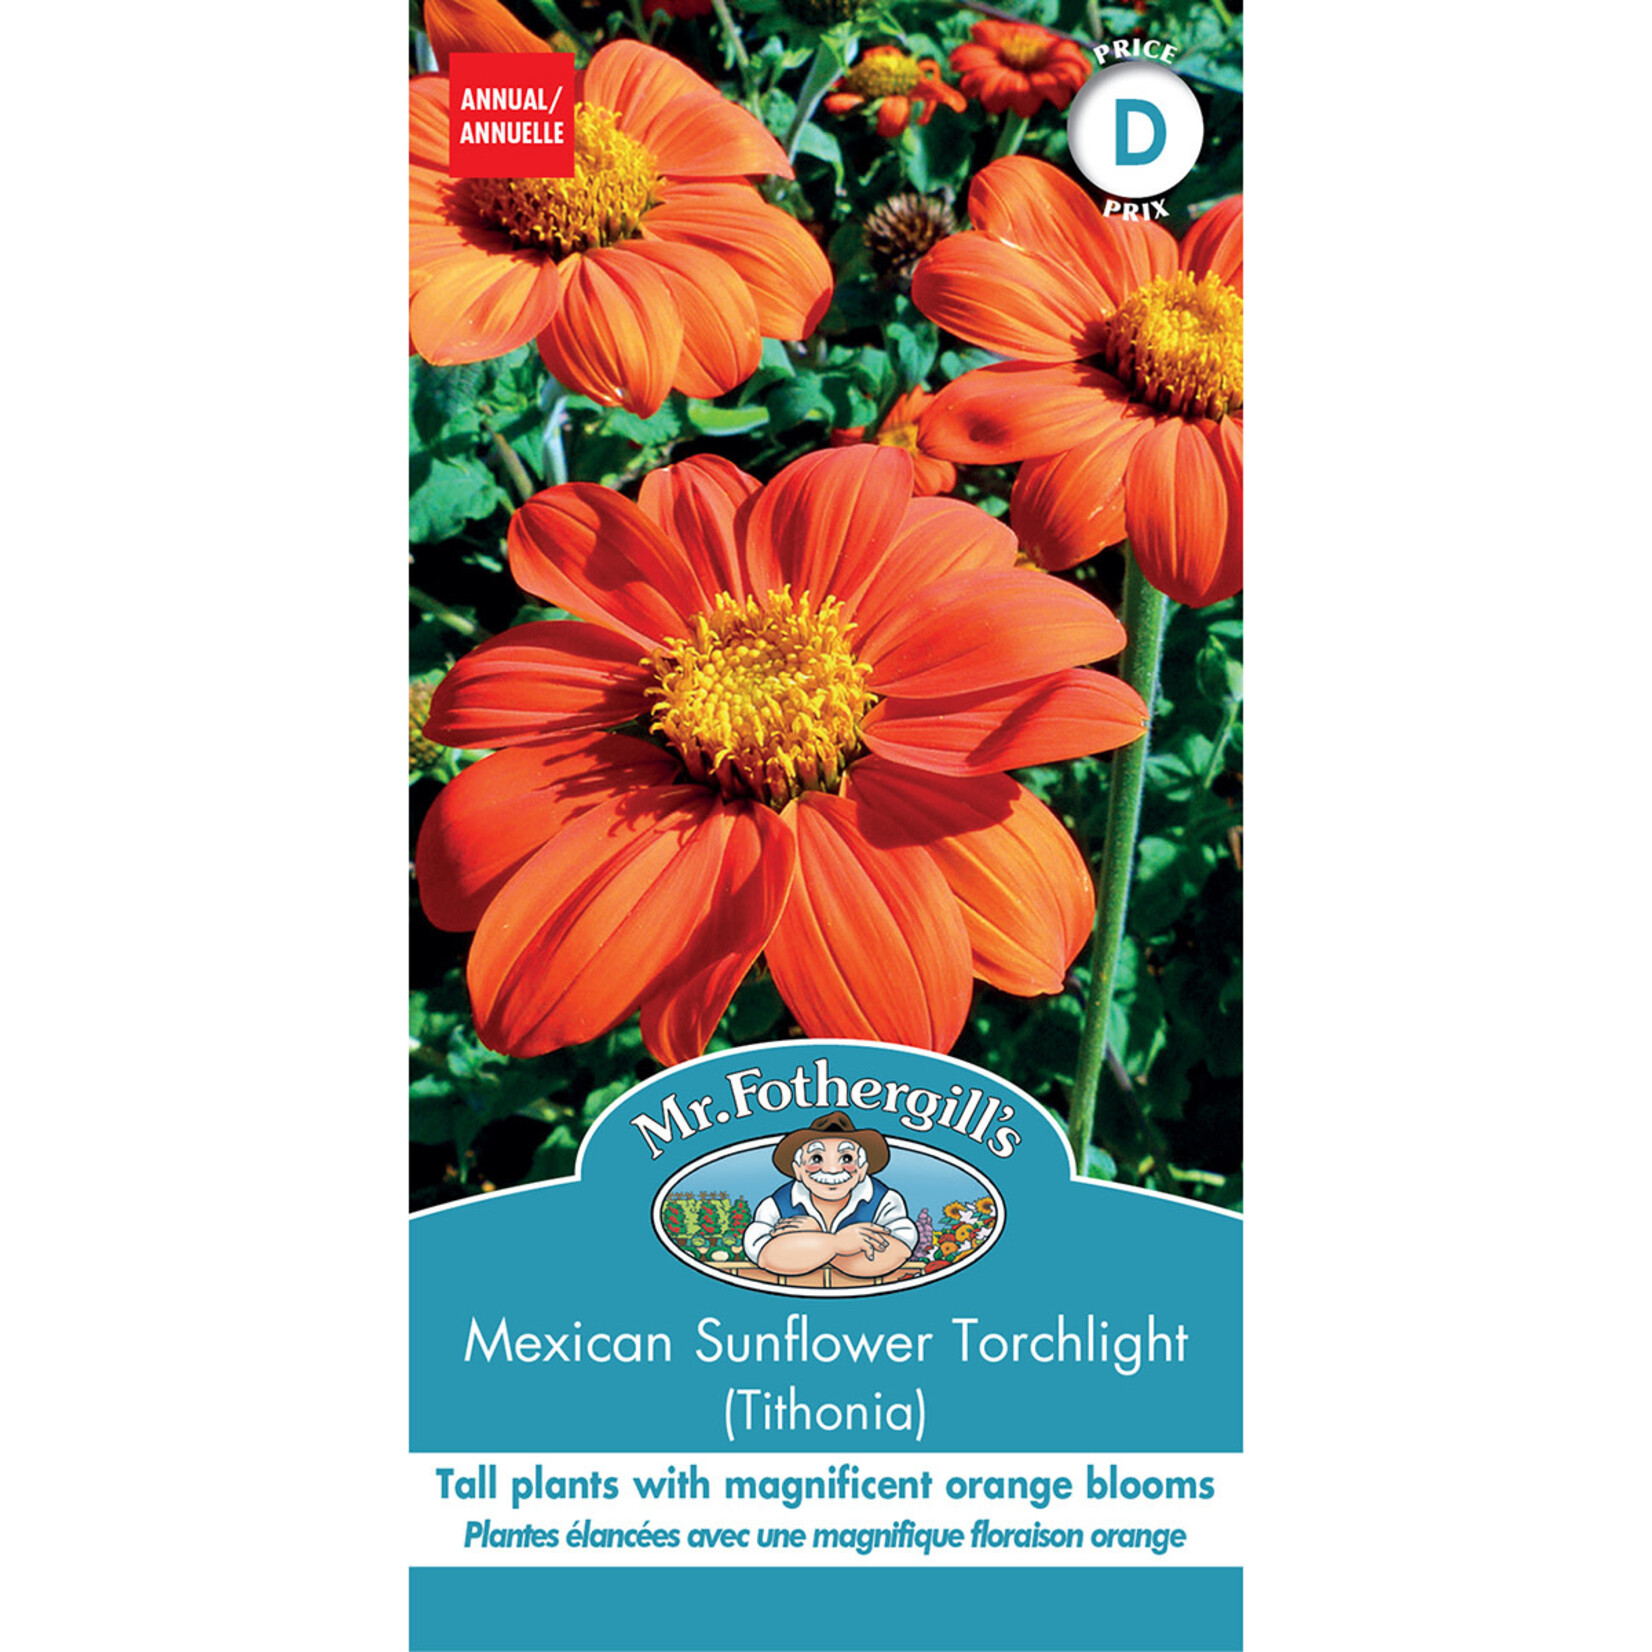 Mr. Fothergill's MEXICAN SUNFLOWER Torchlight Seeds